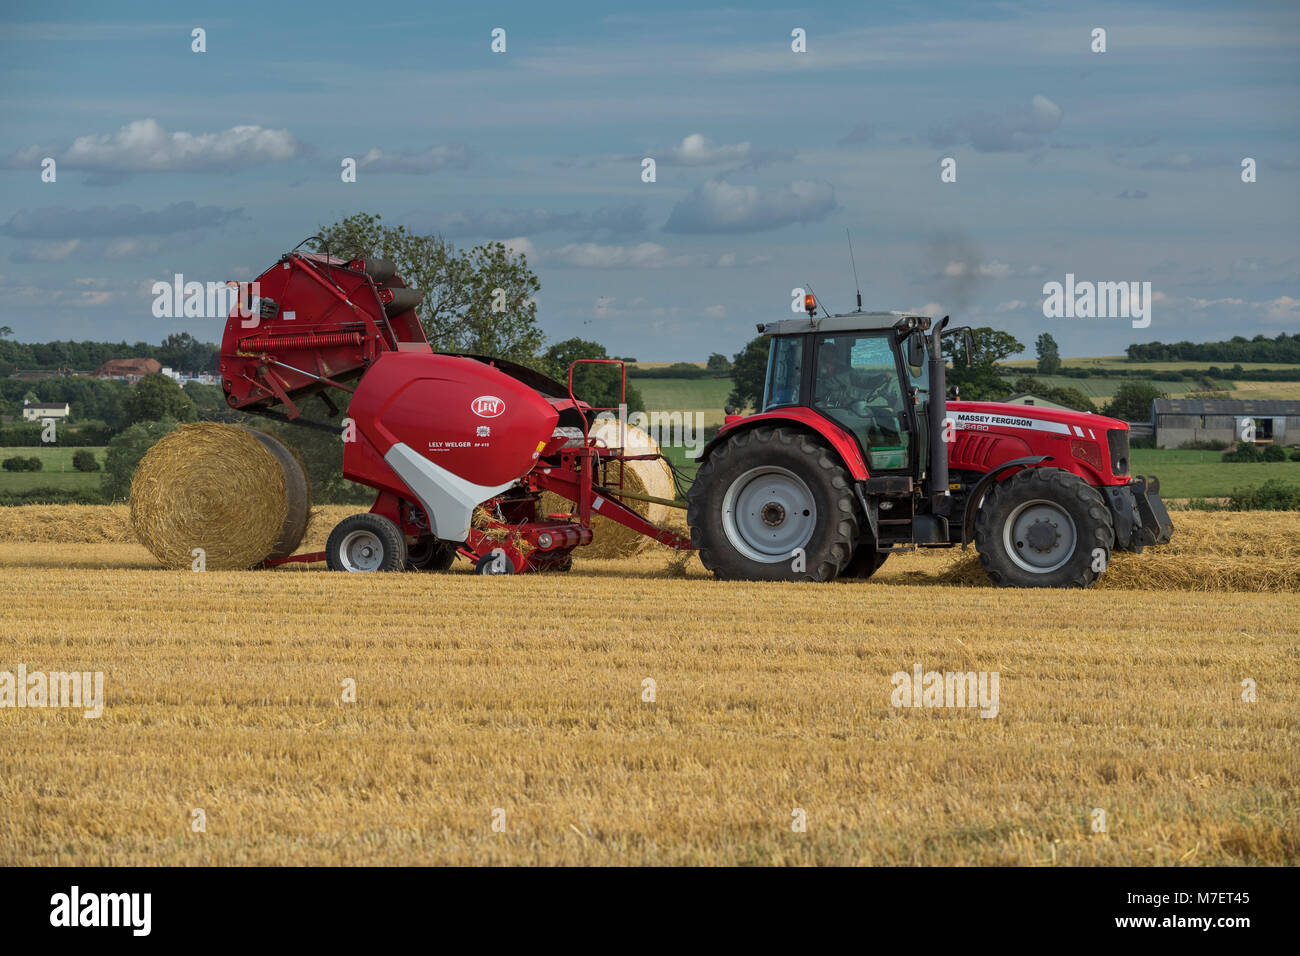 Baling straw in farm field, farmer works & drives red tractor pulling round baler (large bale just released) - Whixley, North Yorkshire, England, UK. Stock Photo